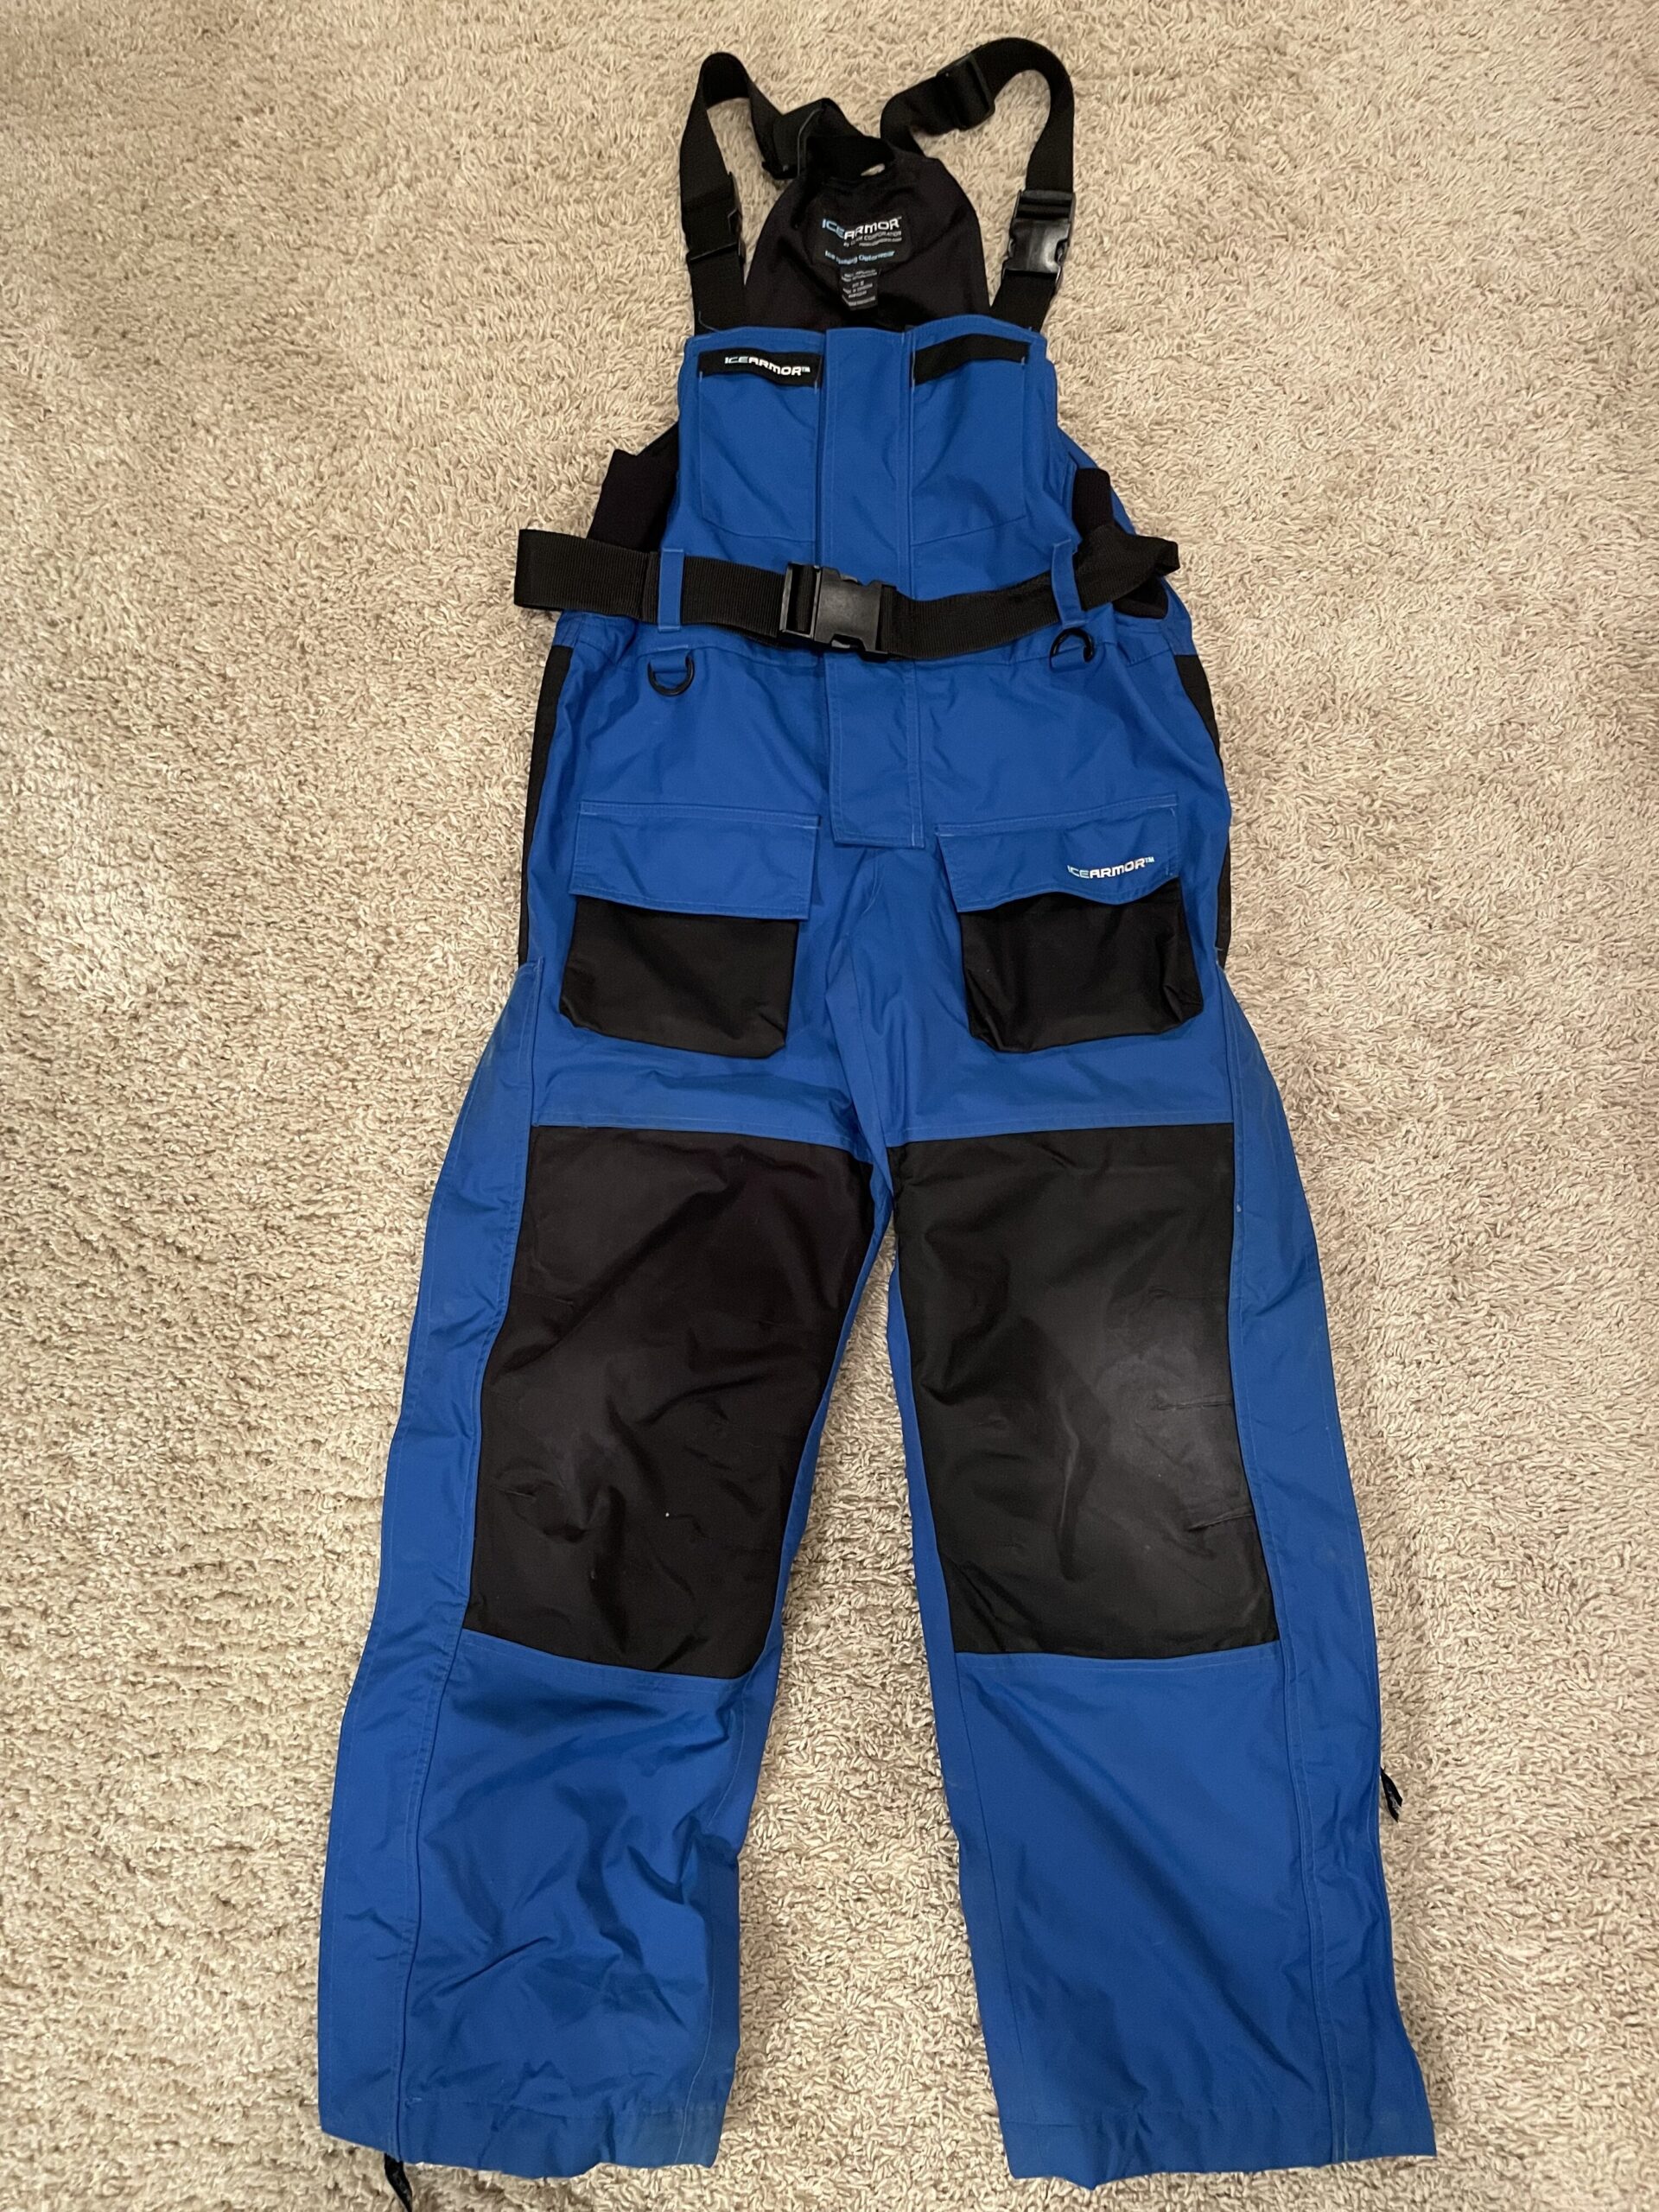 FS Adult small Ice Armor jacket and bibs - Classified Ads - Classified ...